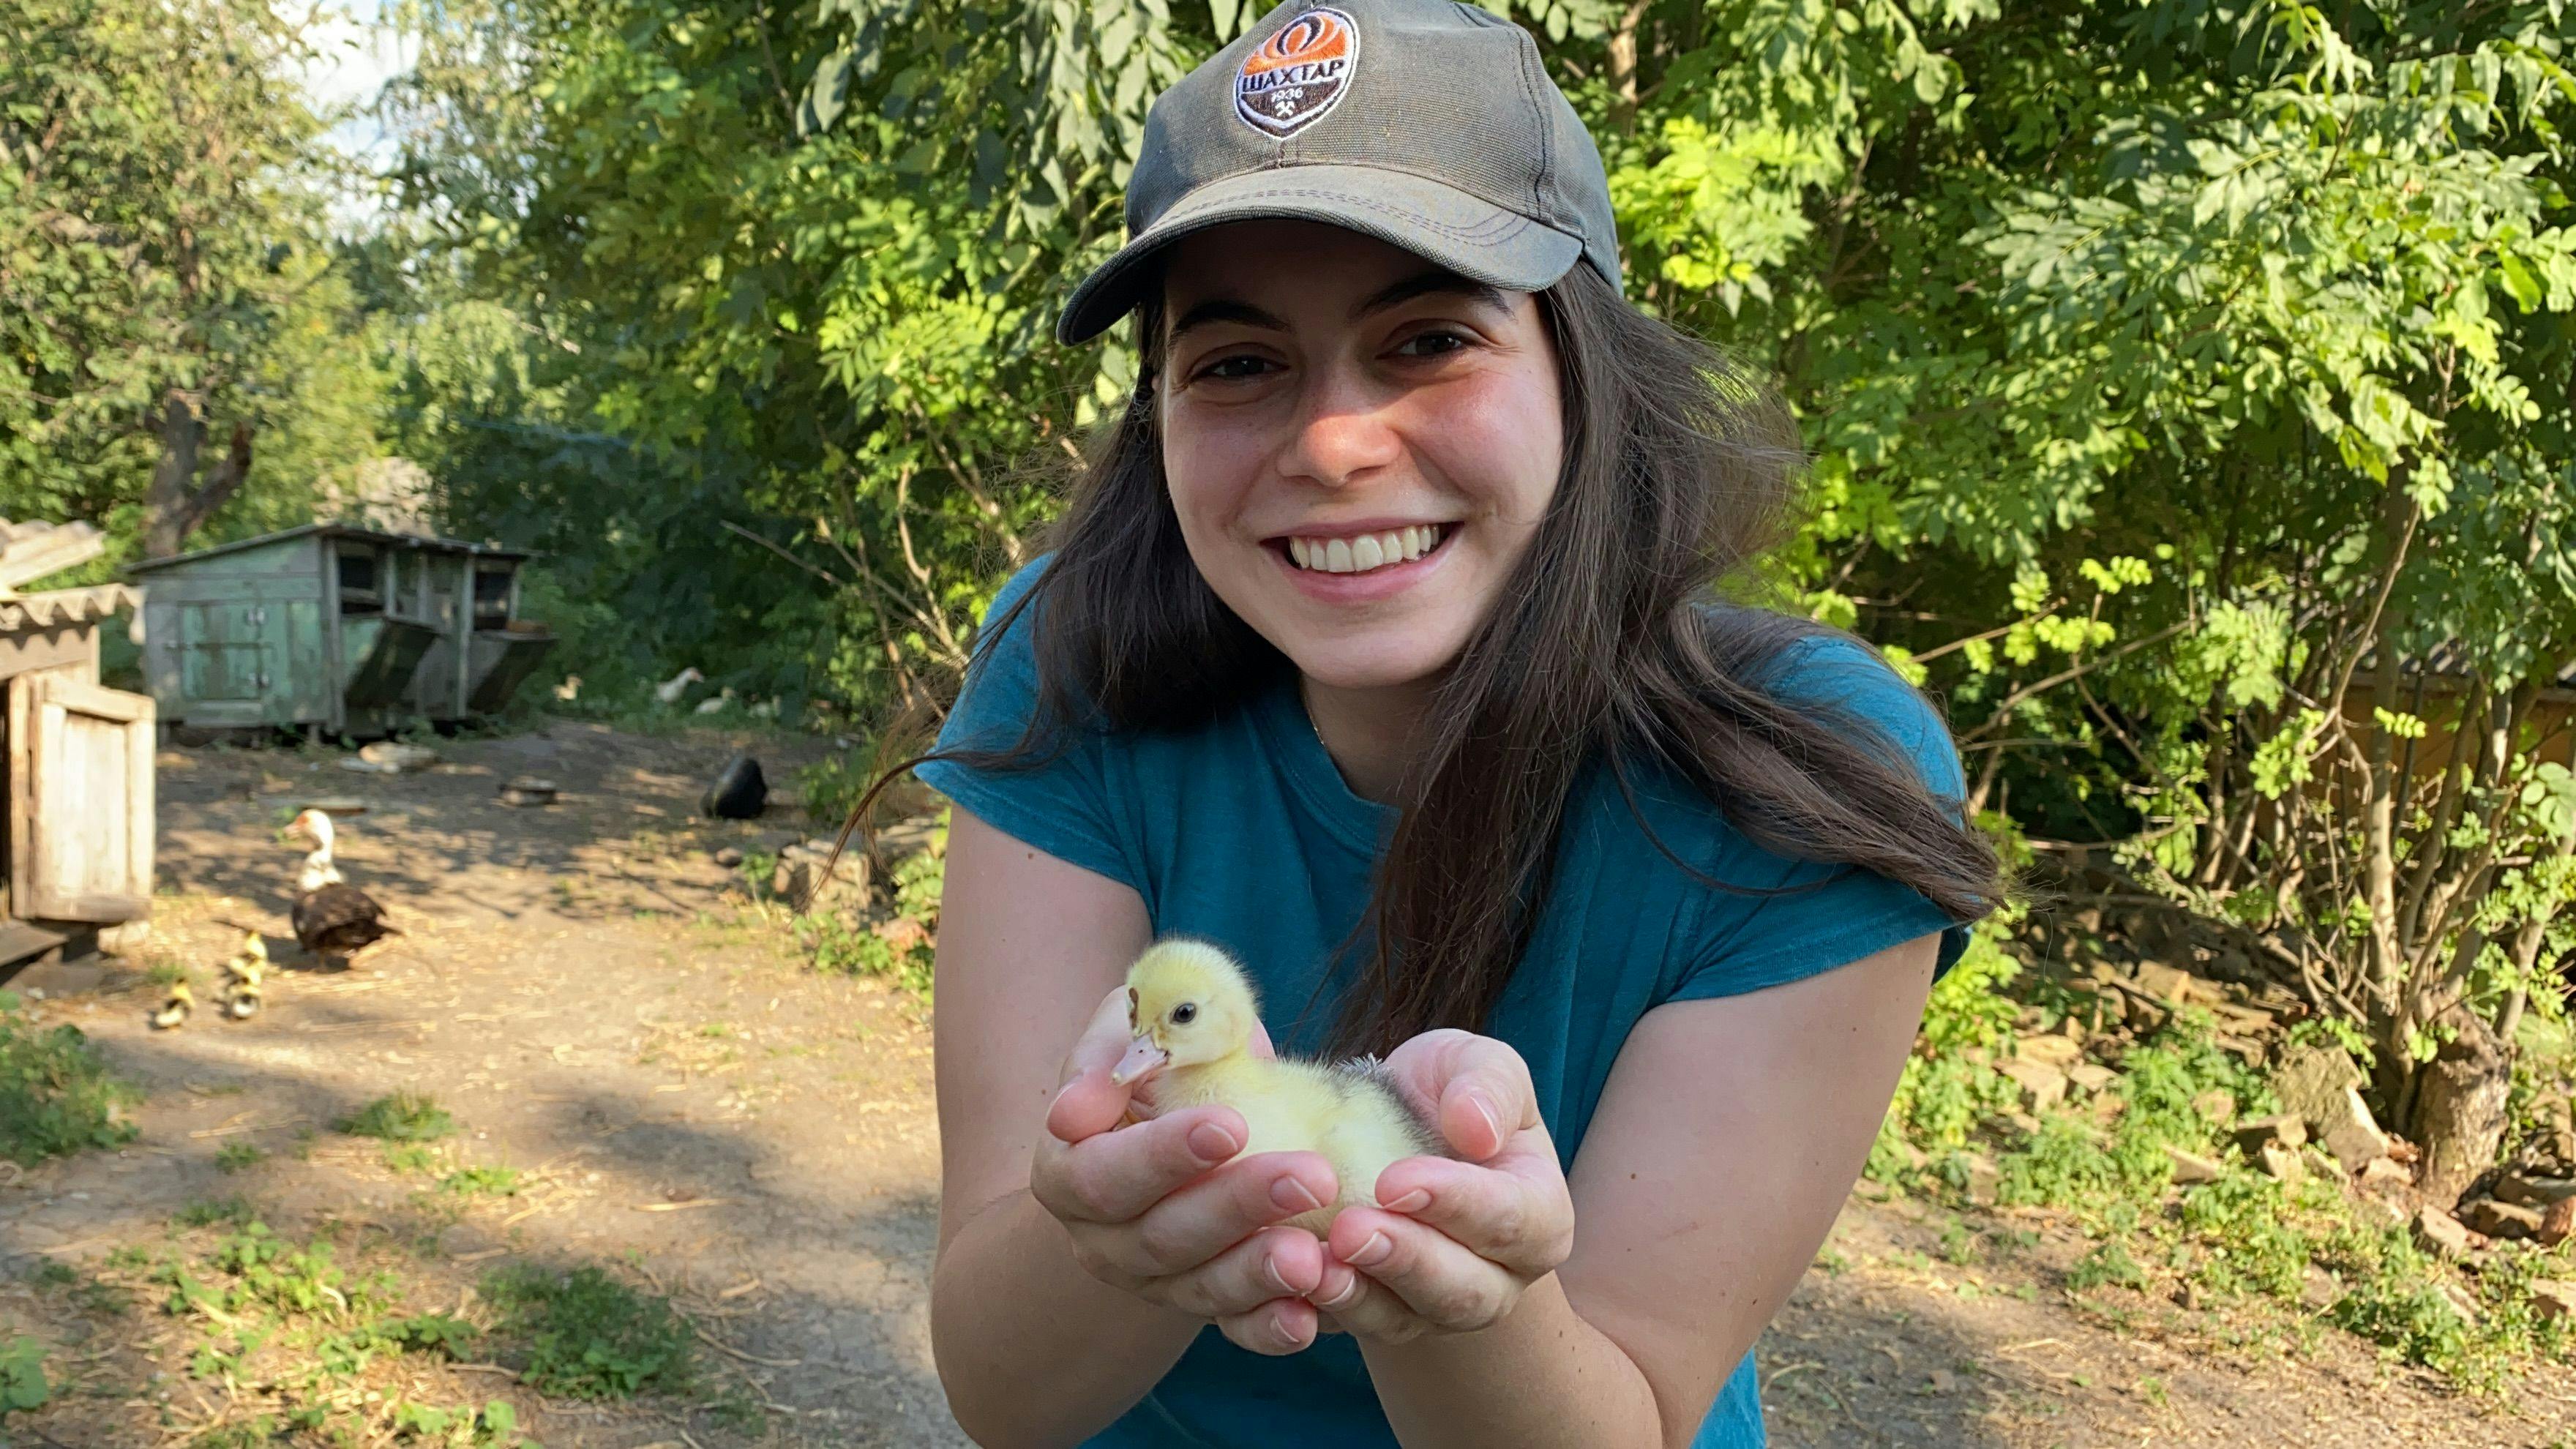 Maryna Mullerman, a first year DVM student at the Cornell University College of Veterinary Medicine, holds a duckling while visiting her grandparents in the countryside outside of Kharkiv, Ukraine, in August 2021.




